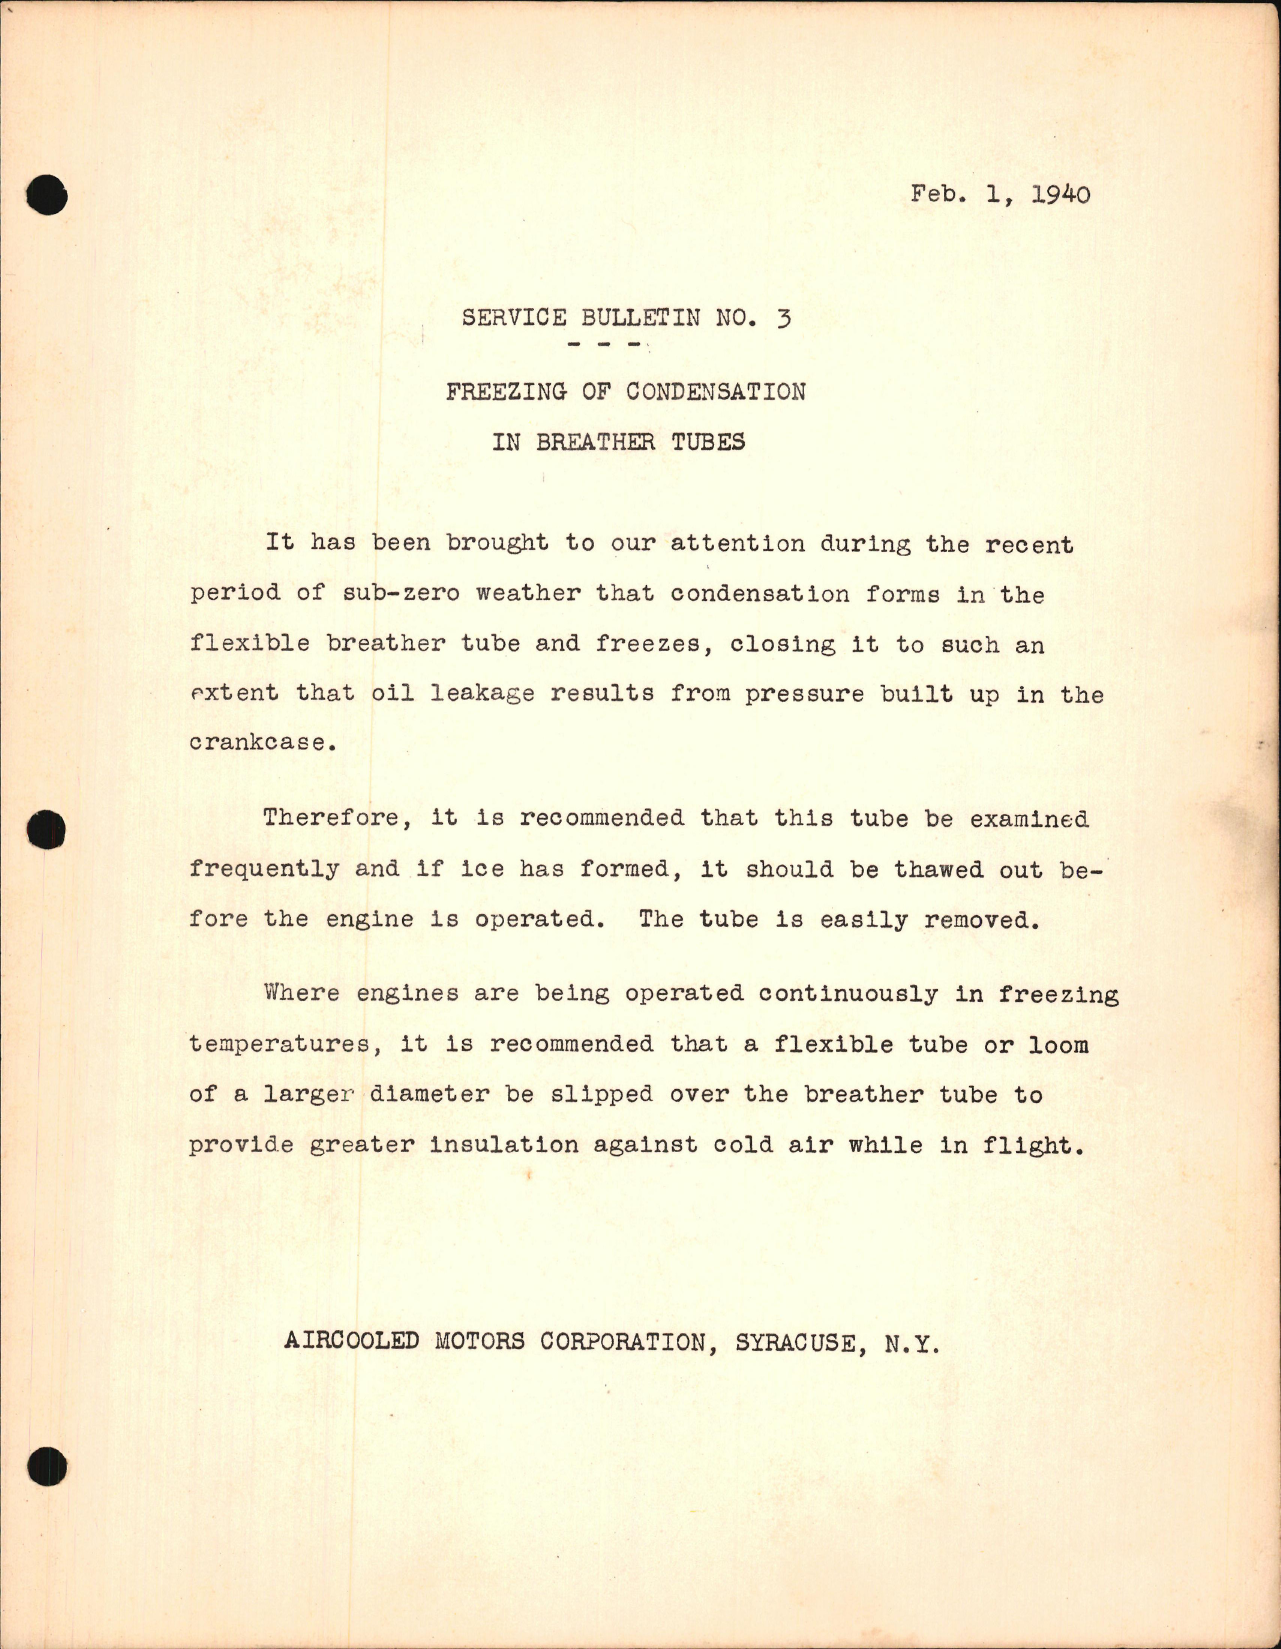 Sample page 1 from AirCorps Library document: Freezing of Condensation in Breather Tubes